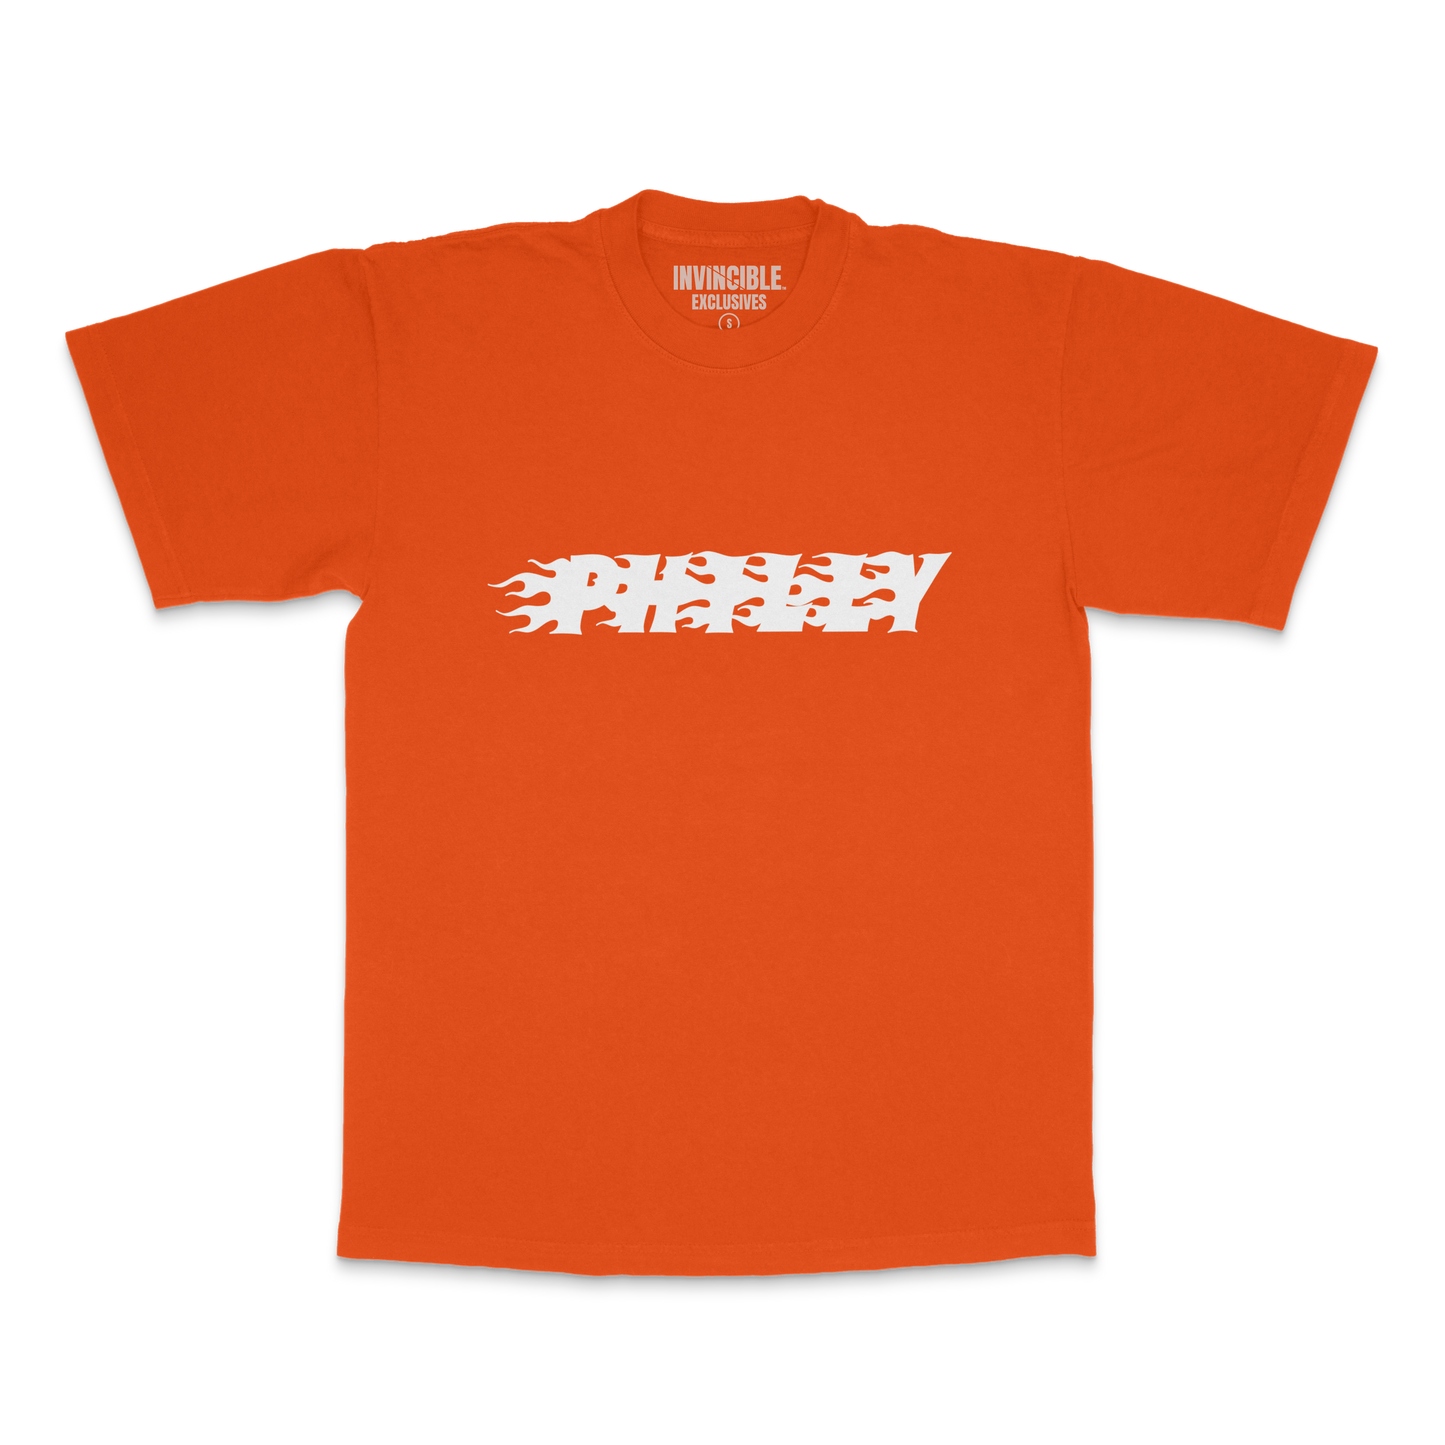 Invincible Exclusives Philly T-Shirt - Orange